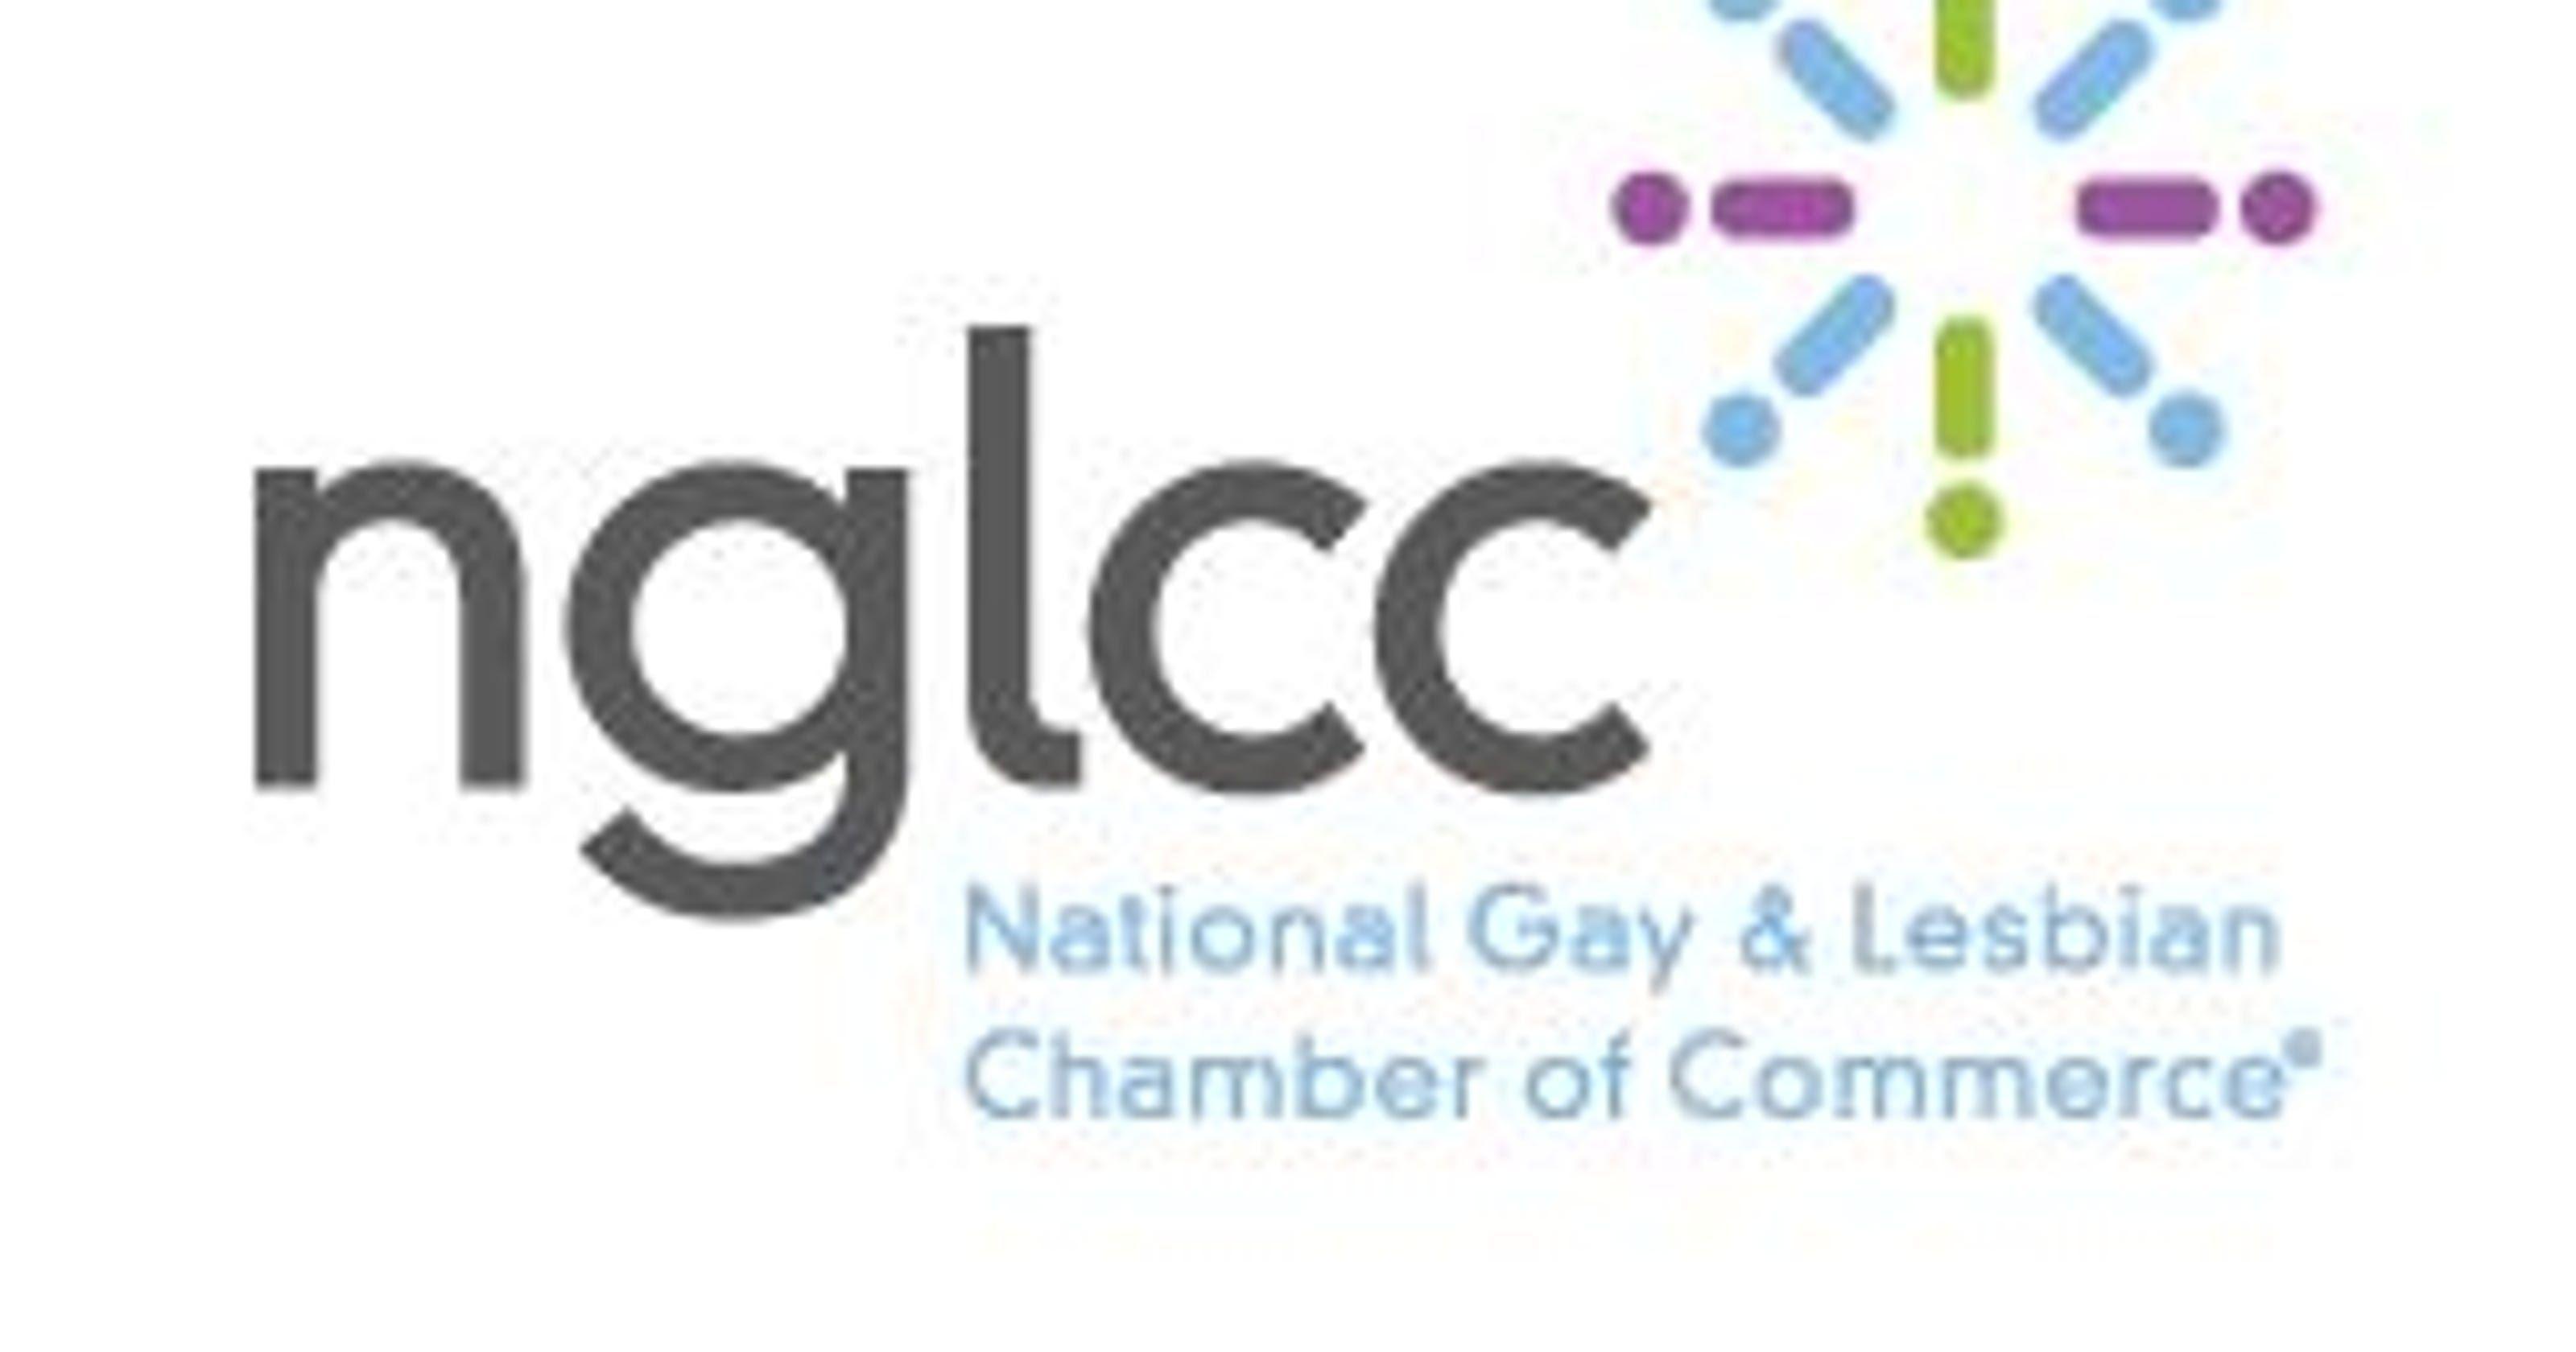 NGLCC Logo - LGBT businesses encouraged to pursue private sector contracts